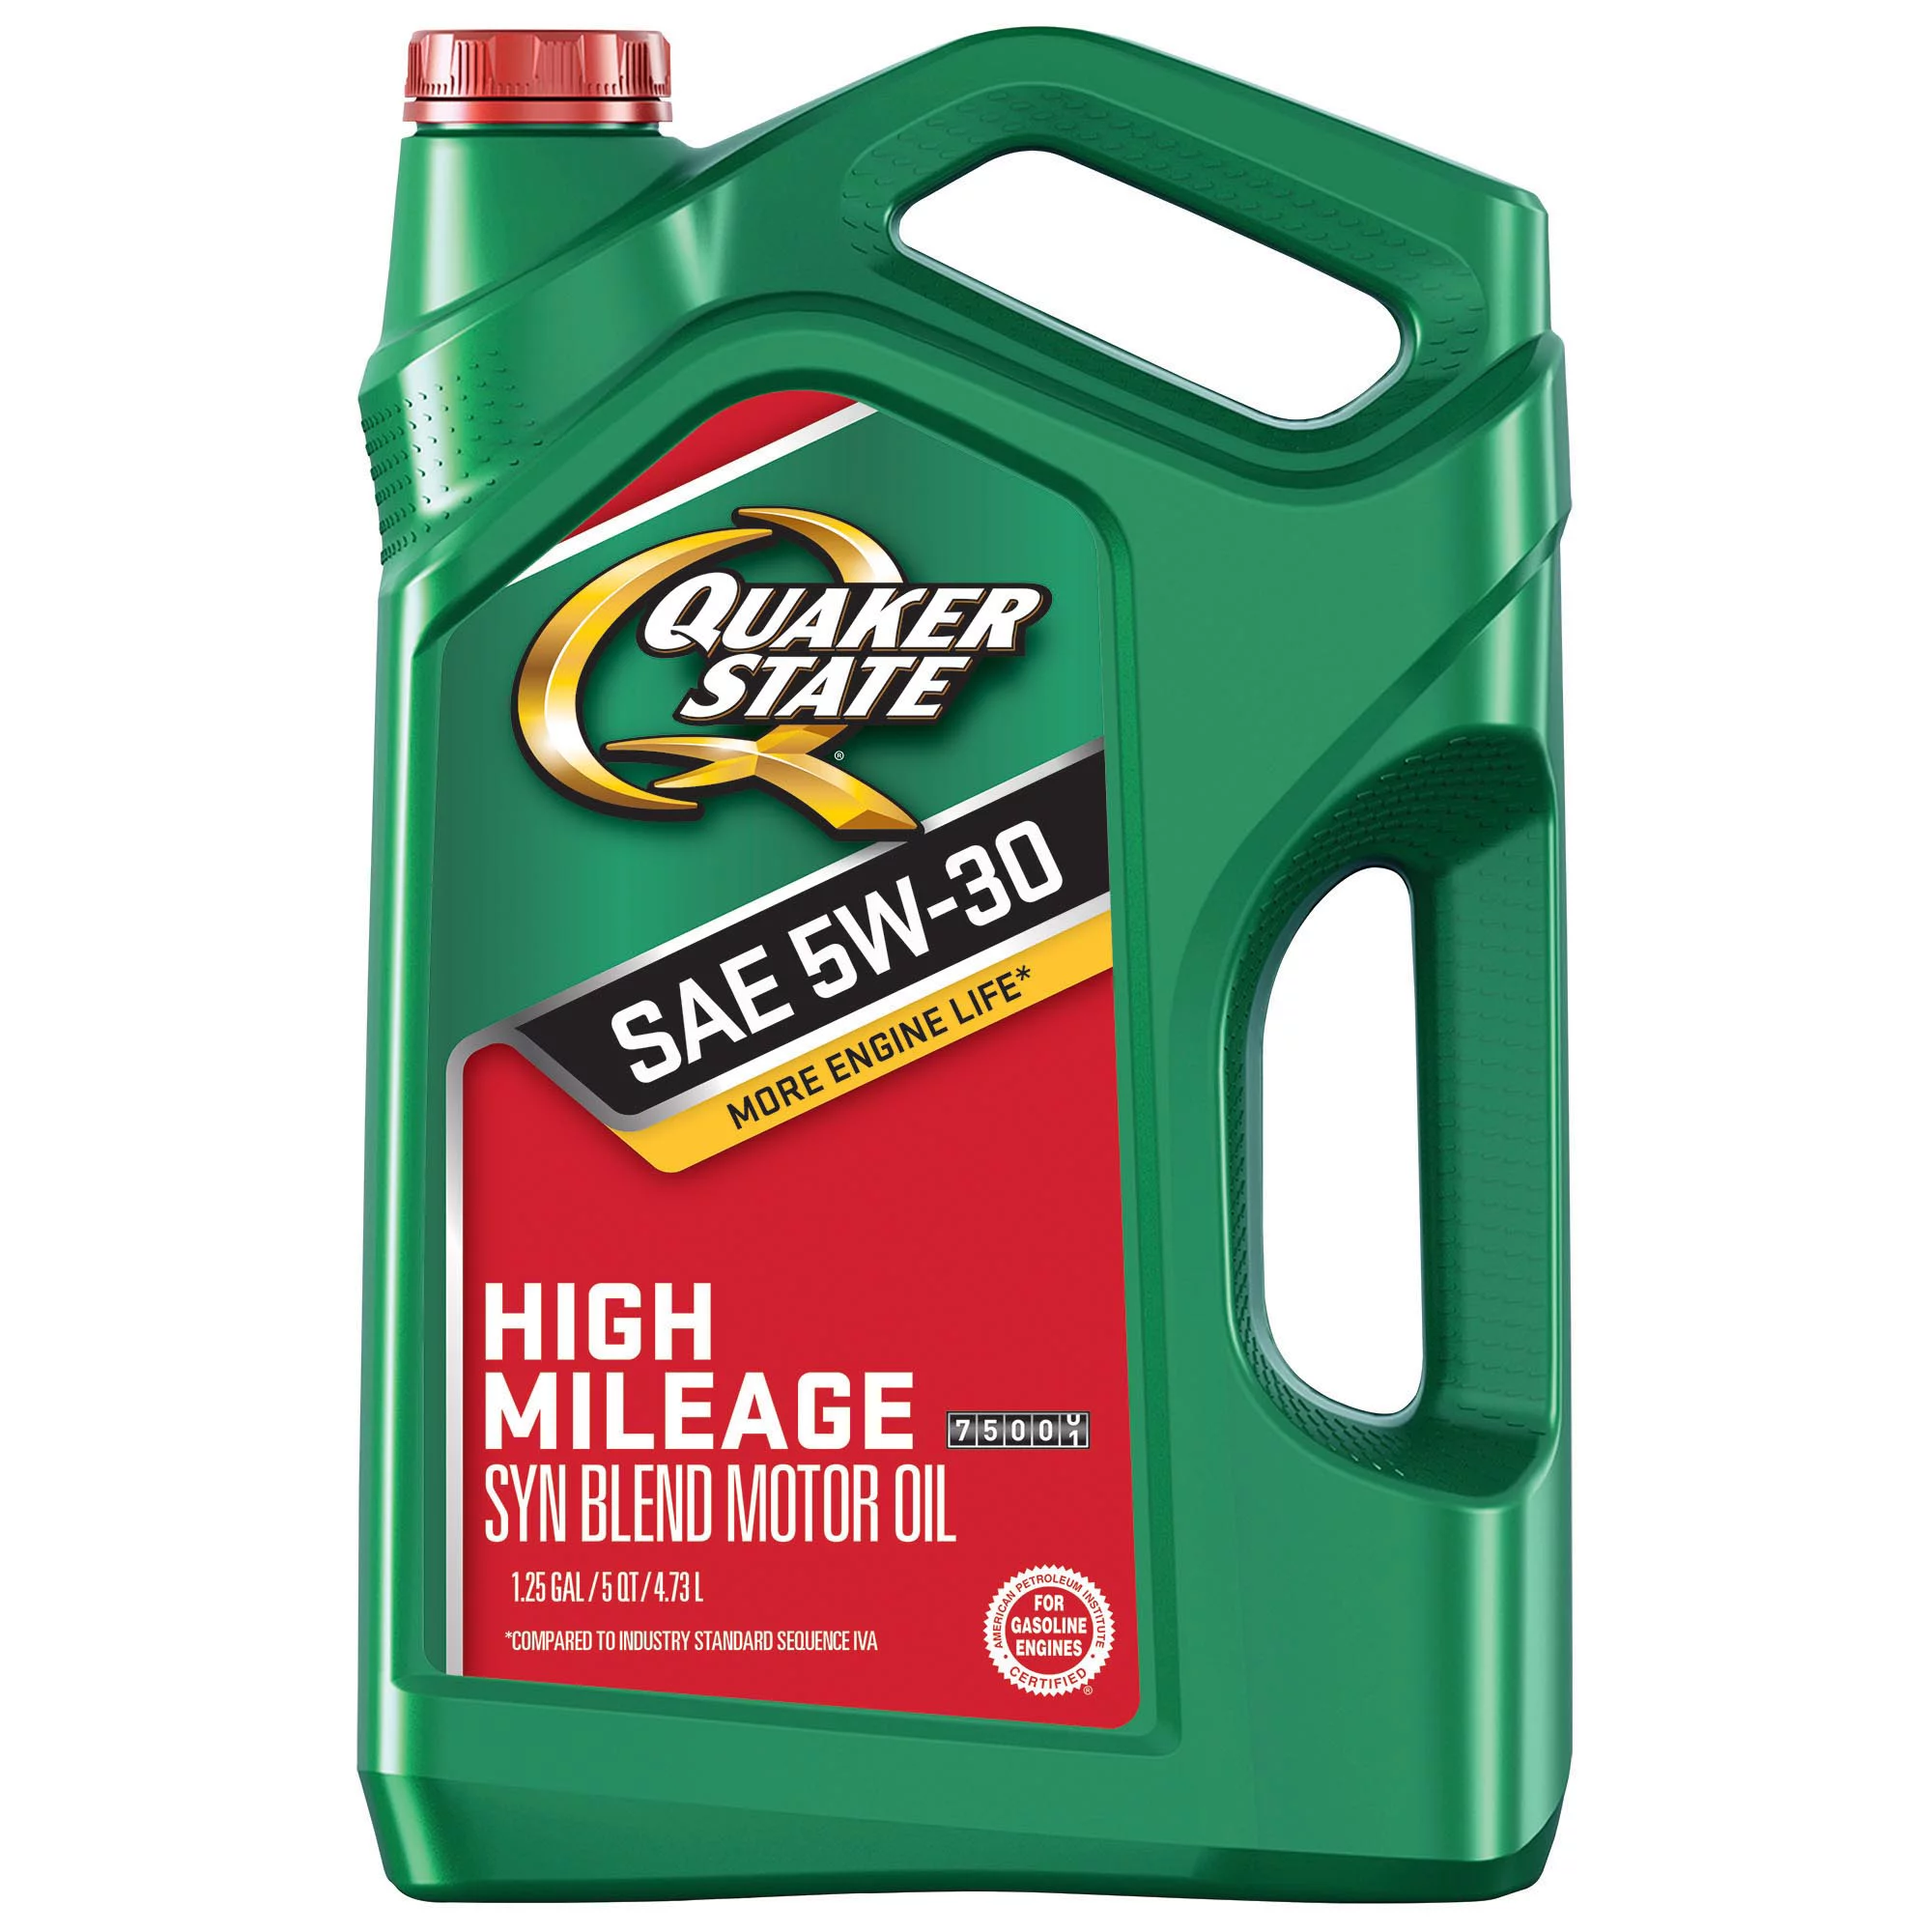 Quaker State High Mileage 5W-30 Synthetic Blend Motor Oil for Vehicles over 75K Miles, 5-Quart